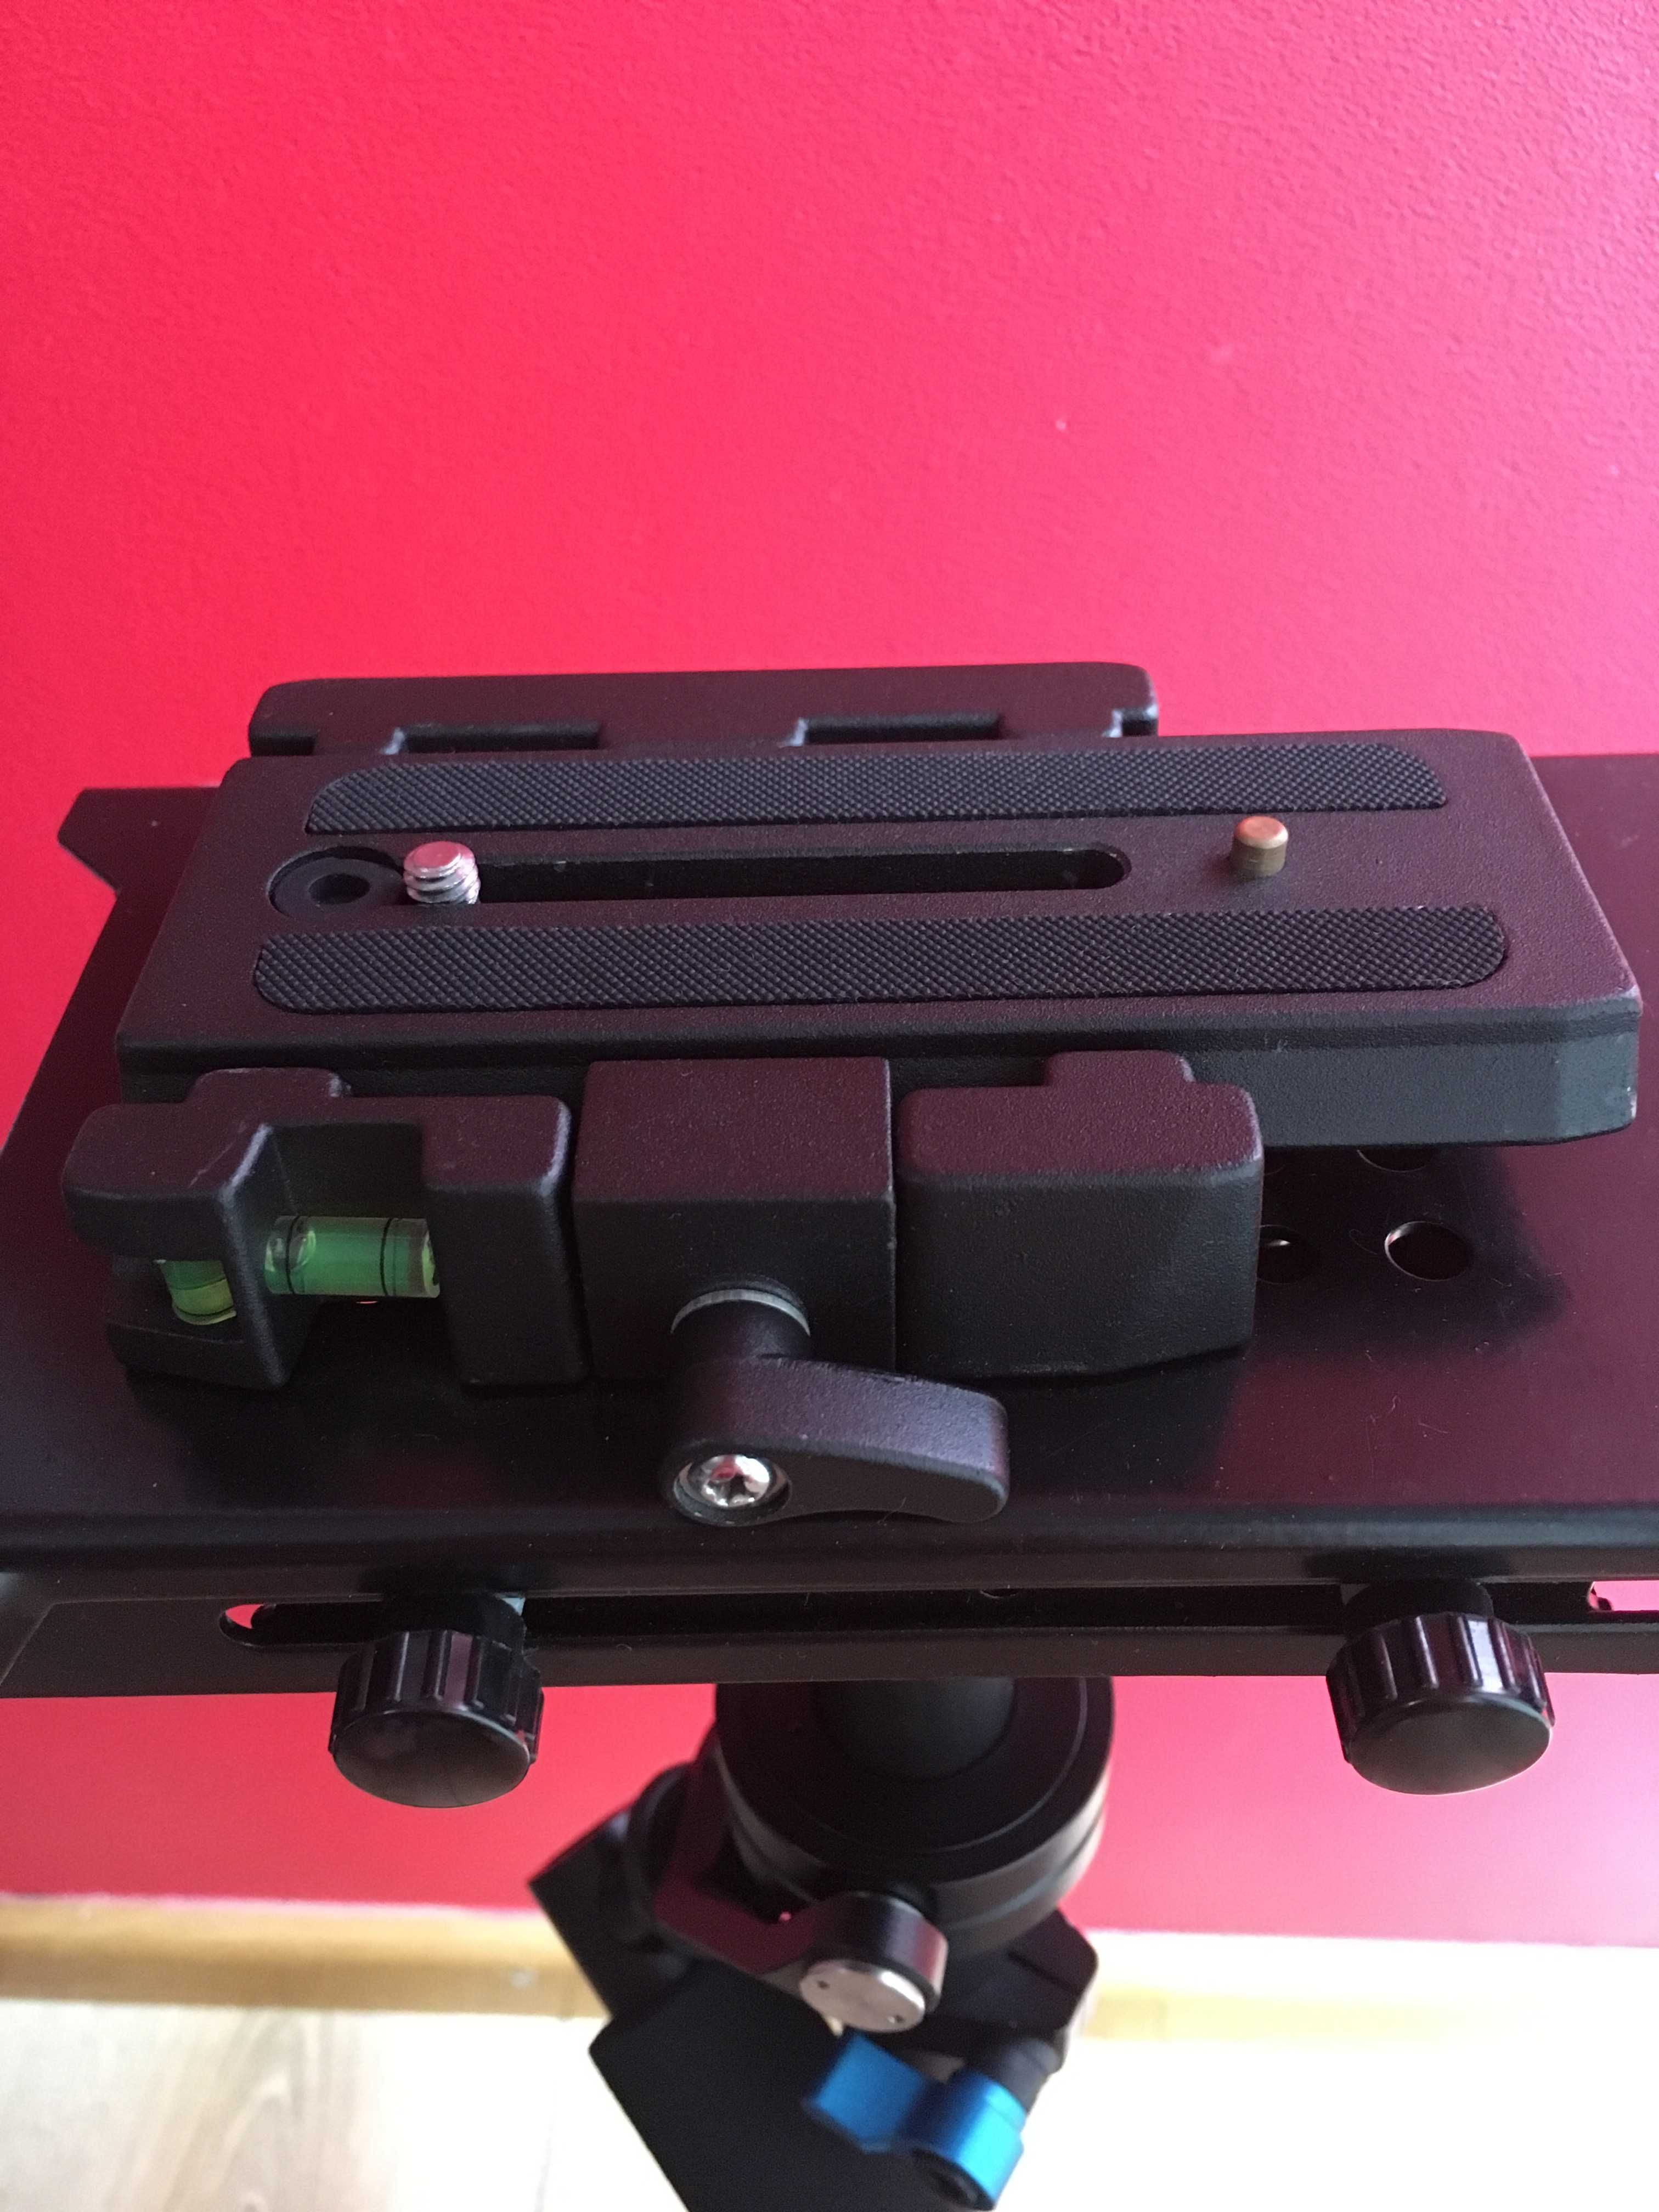 Steadycam - Wieldy Iron Triangle + quick release plate